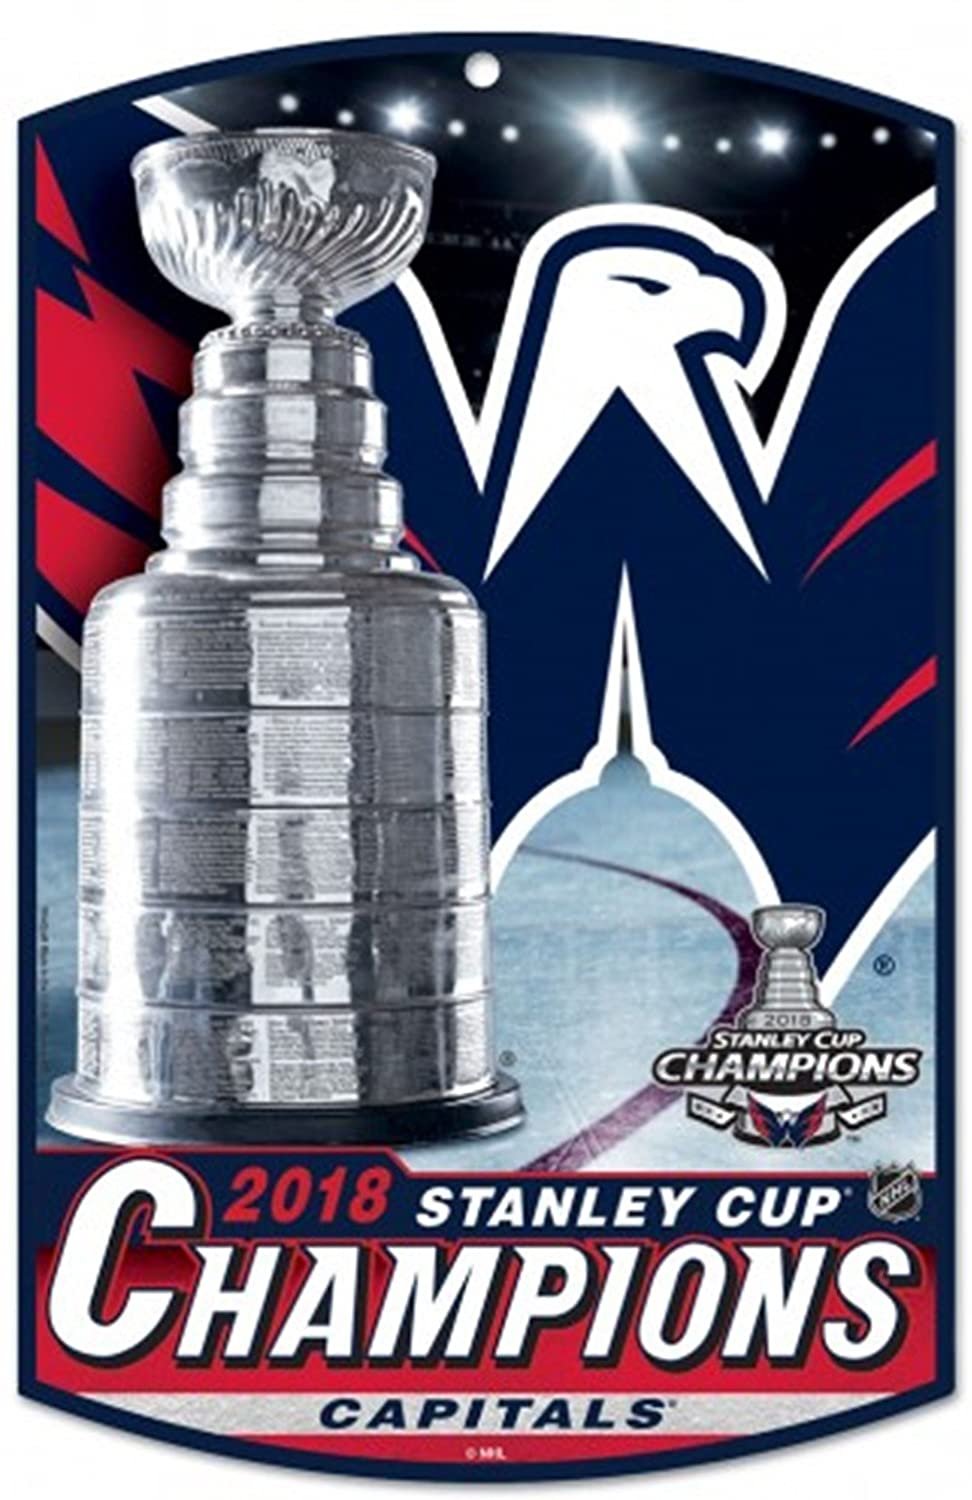 Washington Capitals 2018 Stanley Cup Champions Premium Wood 11x17 Inch Wall Sign